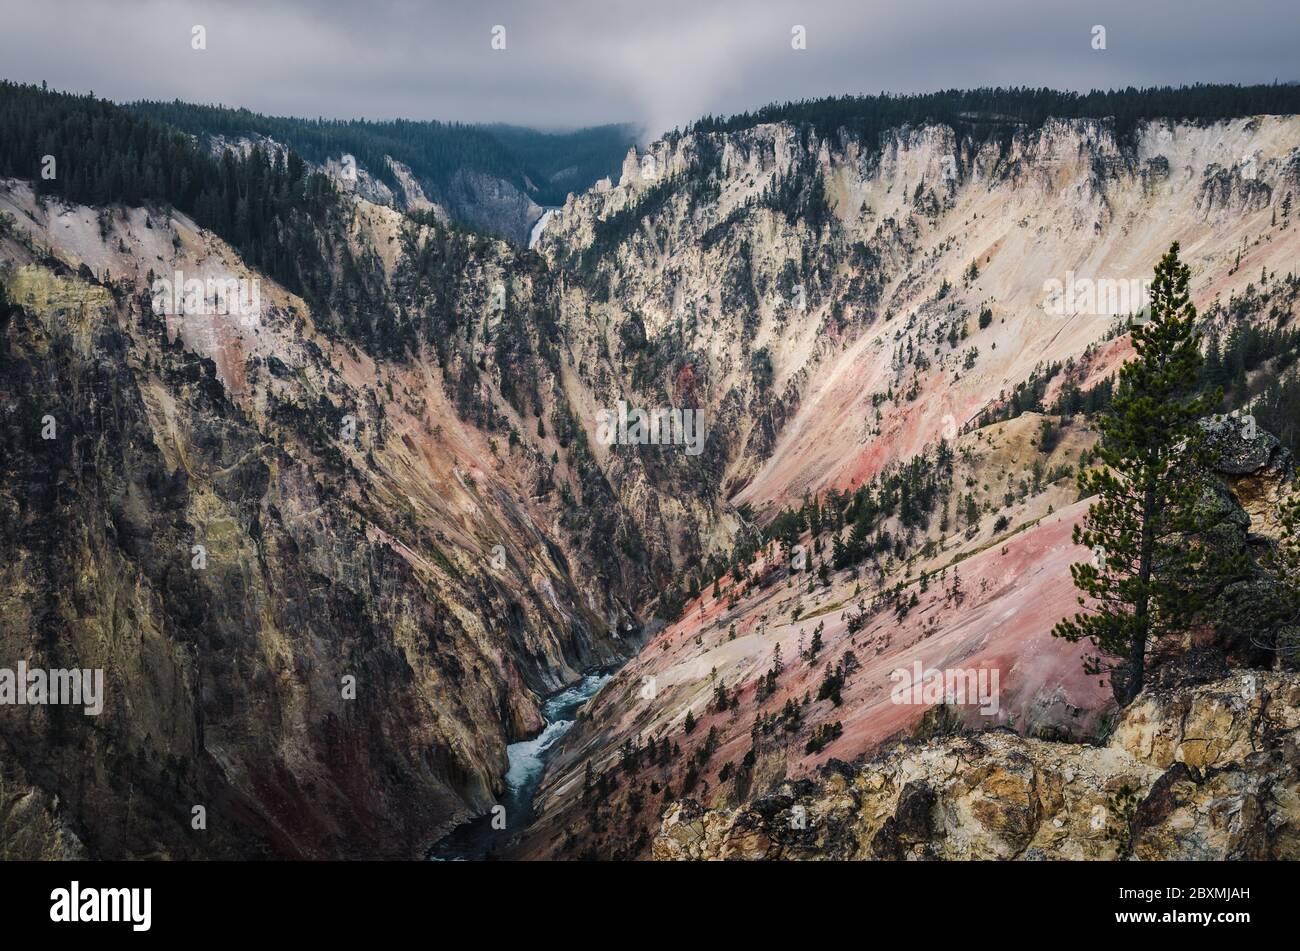 Grand Canyon of the Yellowstone inYellowstone National Park, Wyoming Stock Photo